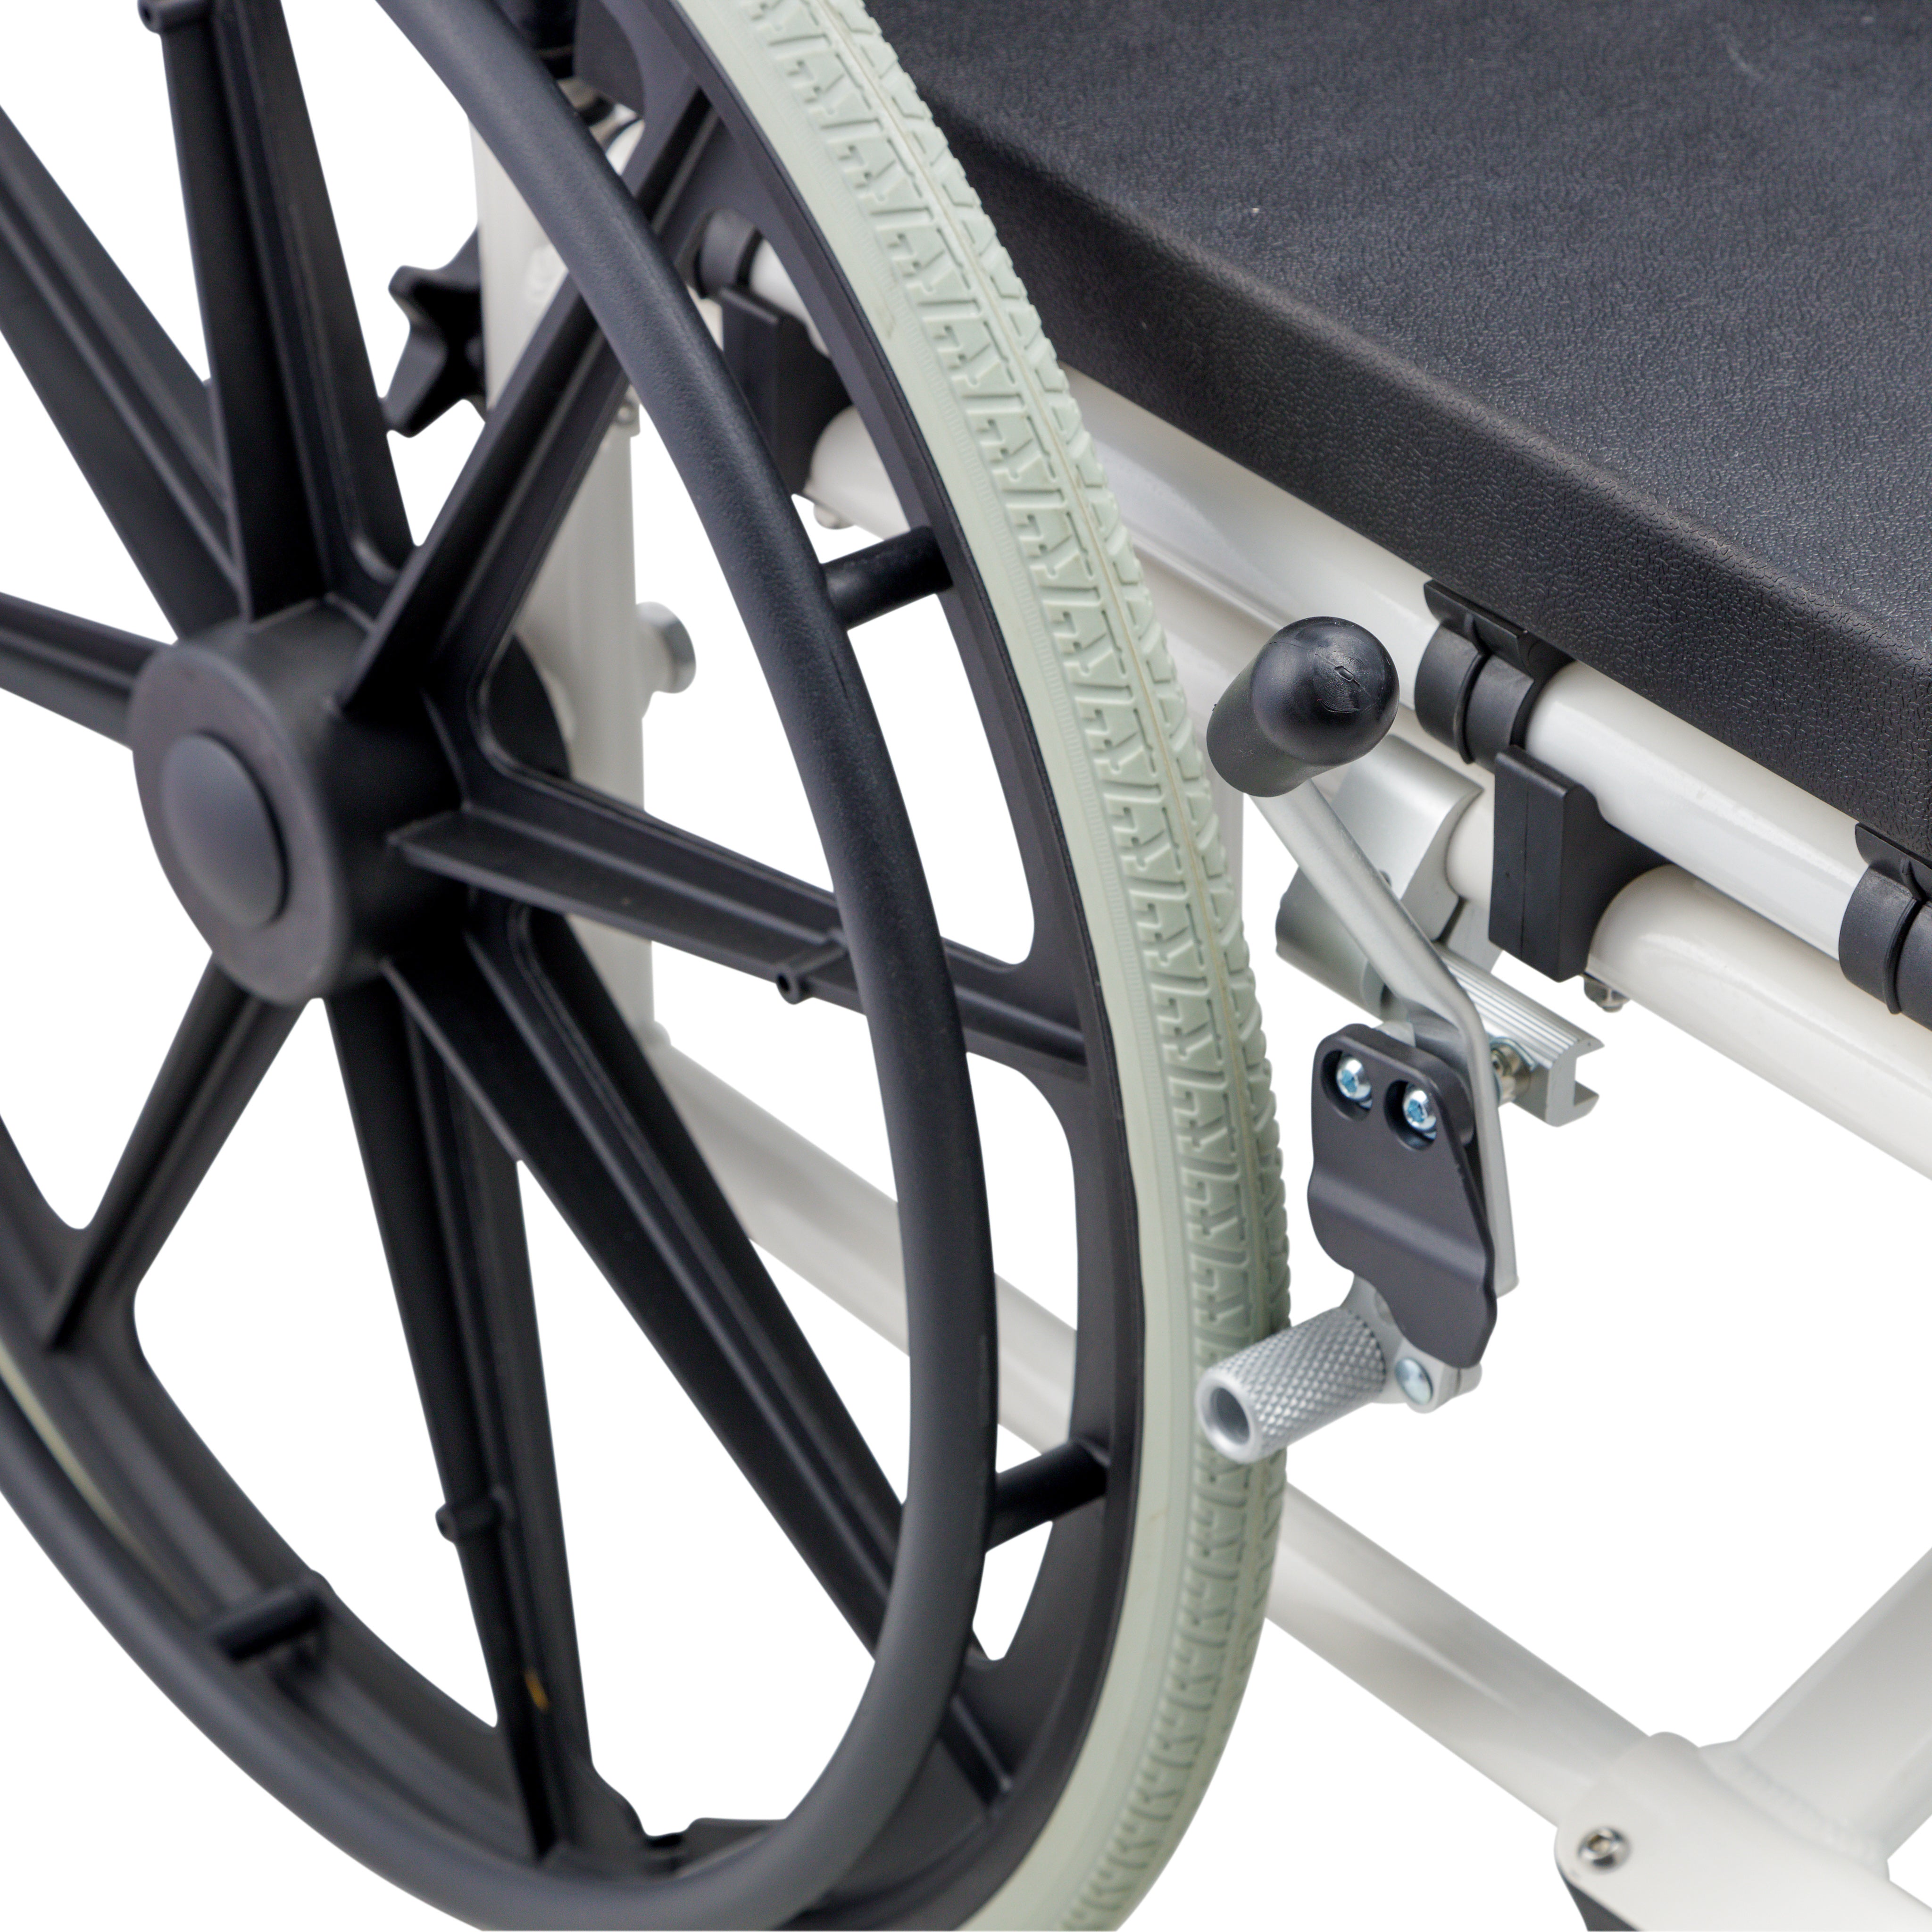 3-in-1 Aluminum Transport, Commode and Shower Wheelchair (Heavy Duty)